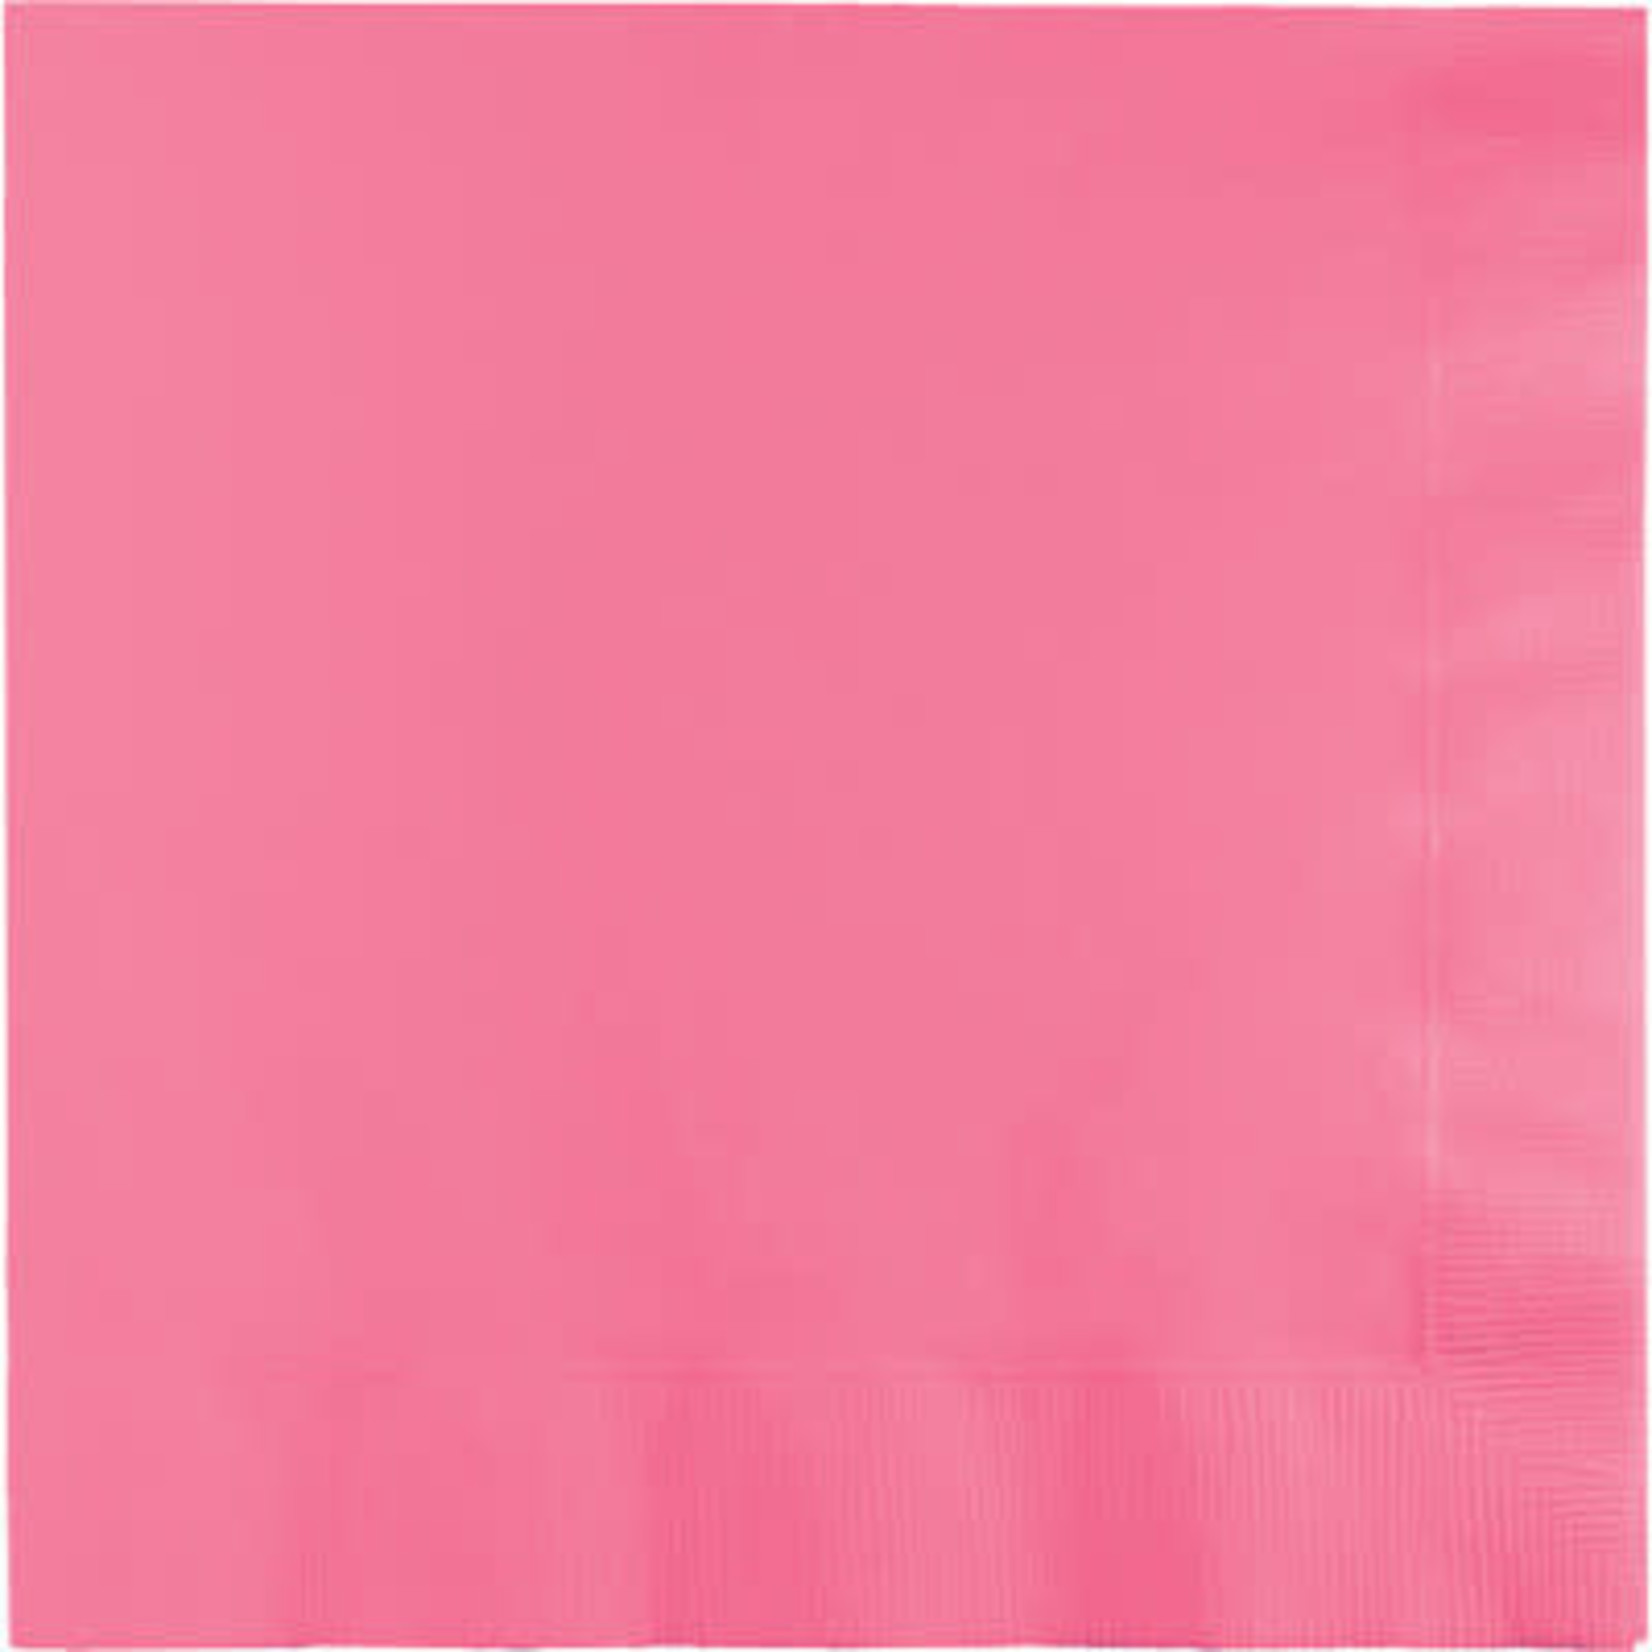 Touch of Color Candy Pink 3-Ply Dinner Napkins - 25ct.